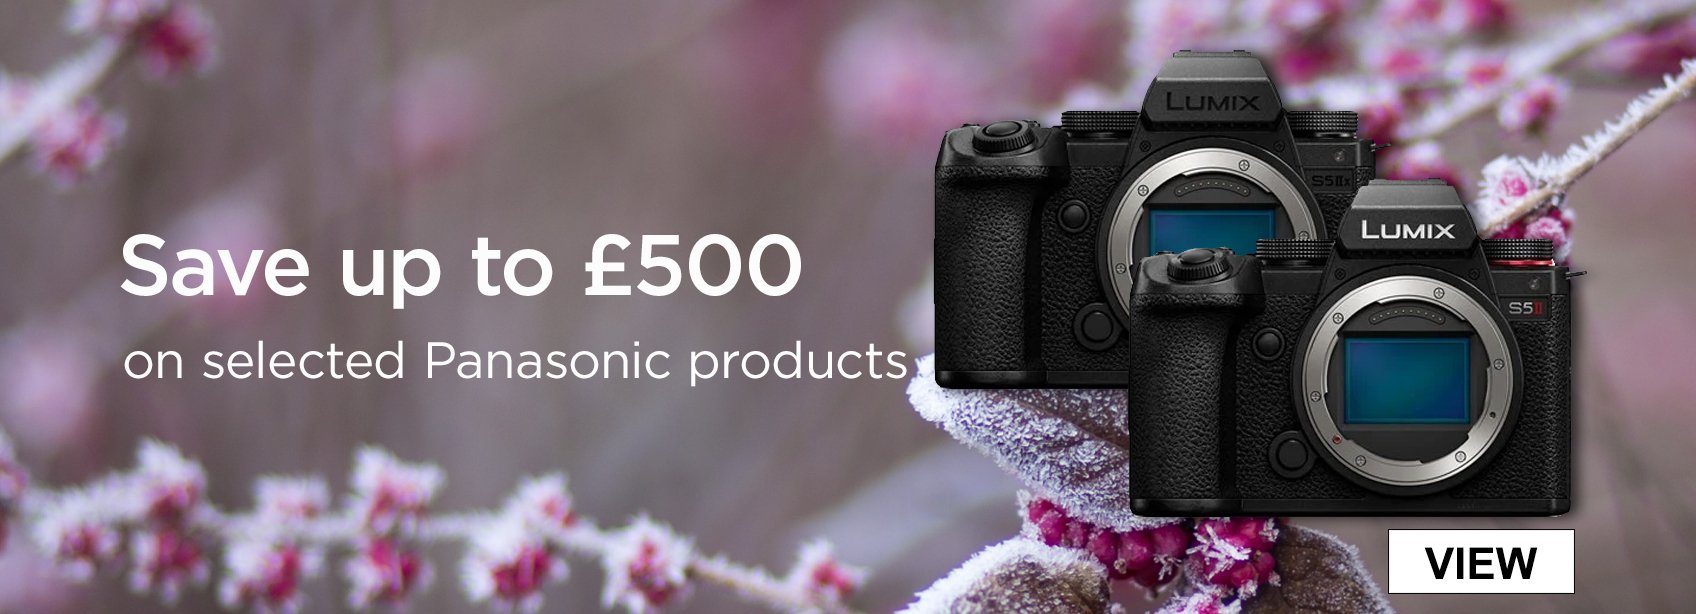 Save up to £500 on selected Panasonic products